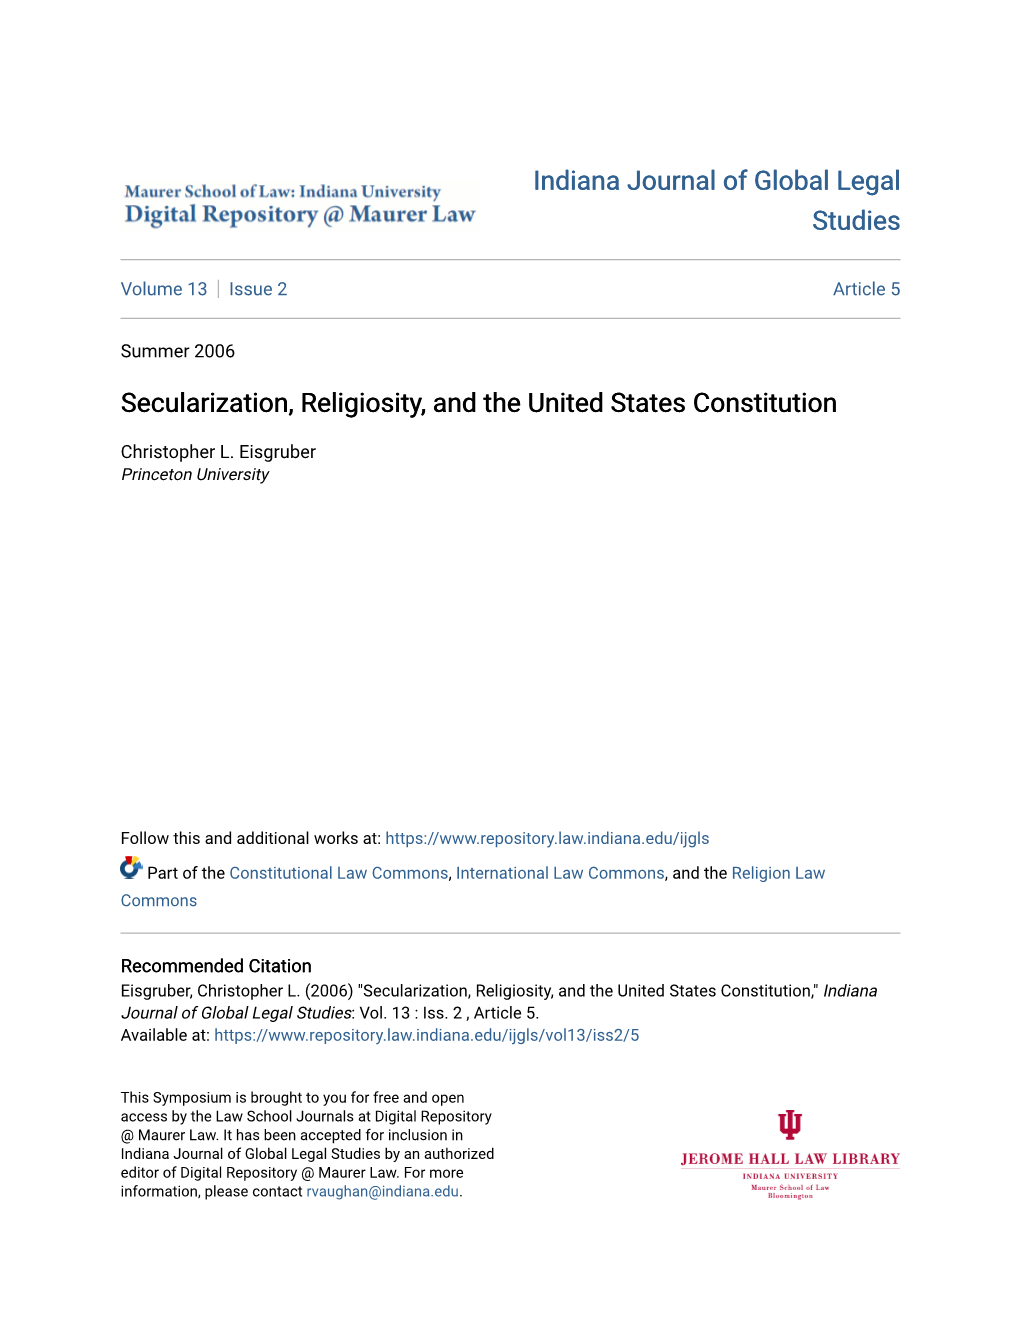 Secularization, Religiosity, and the United States Constitution